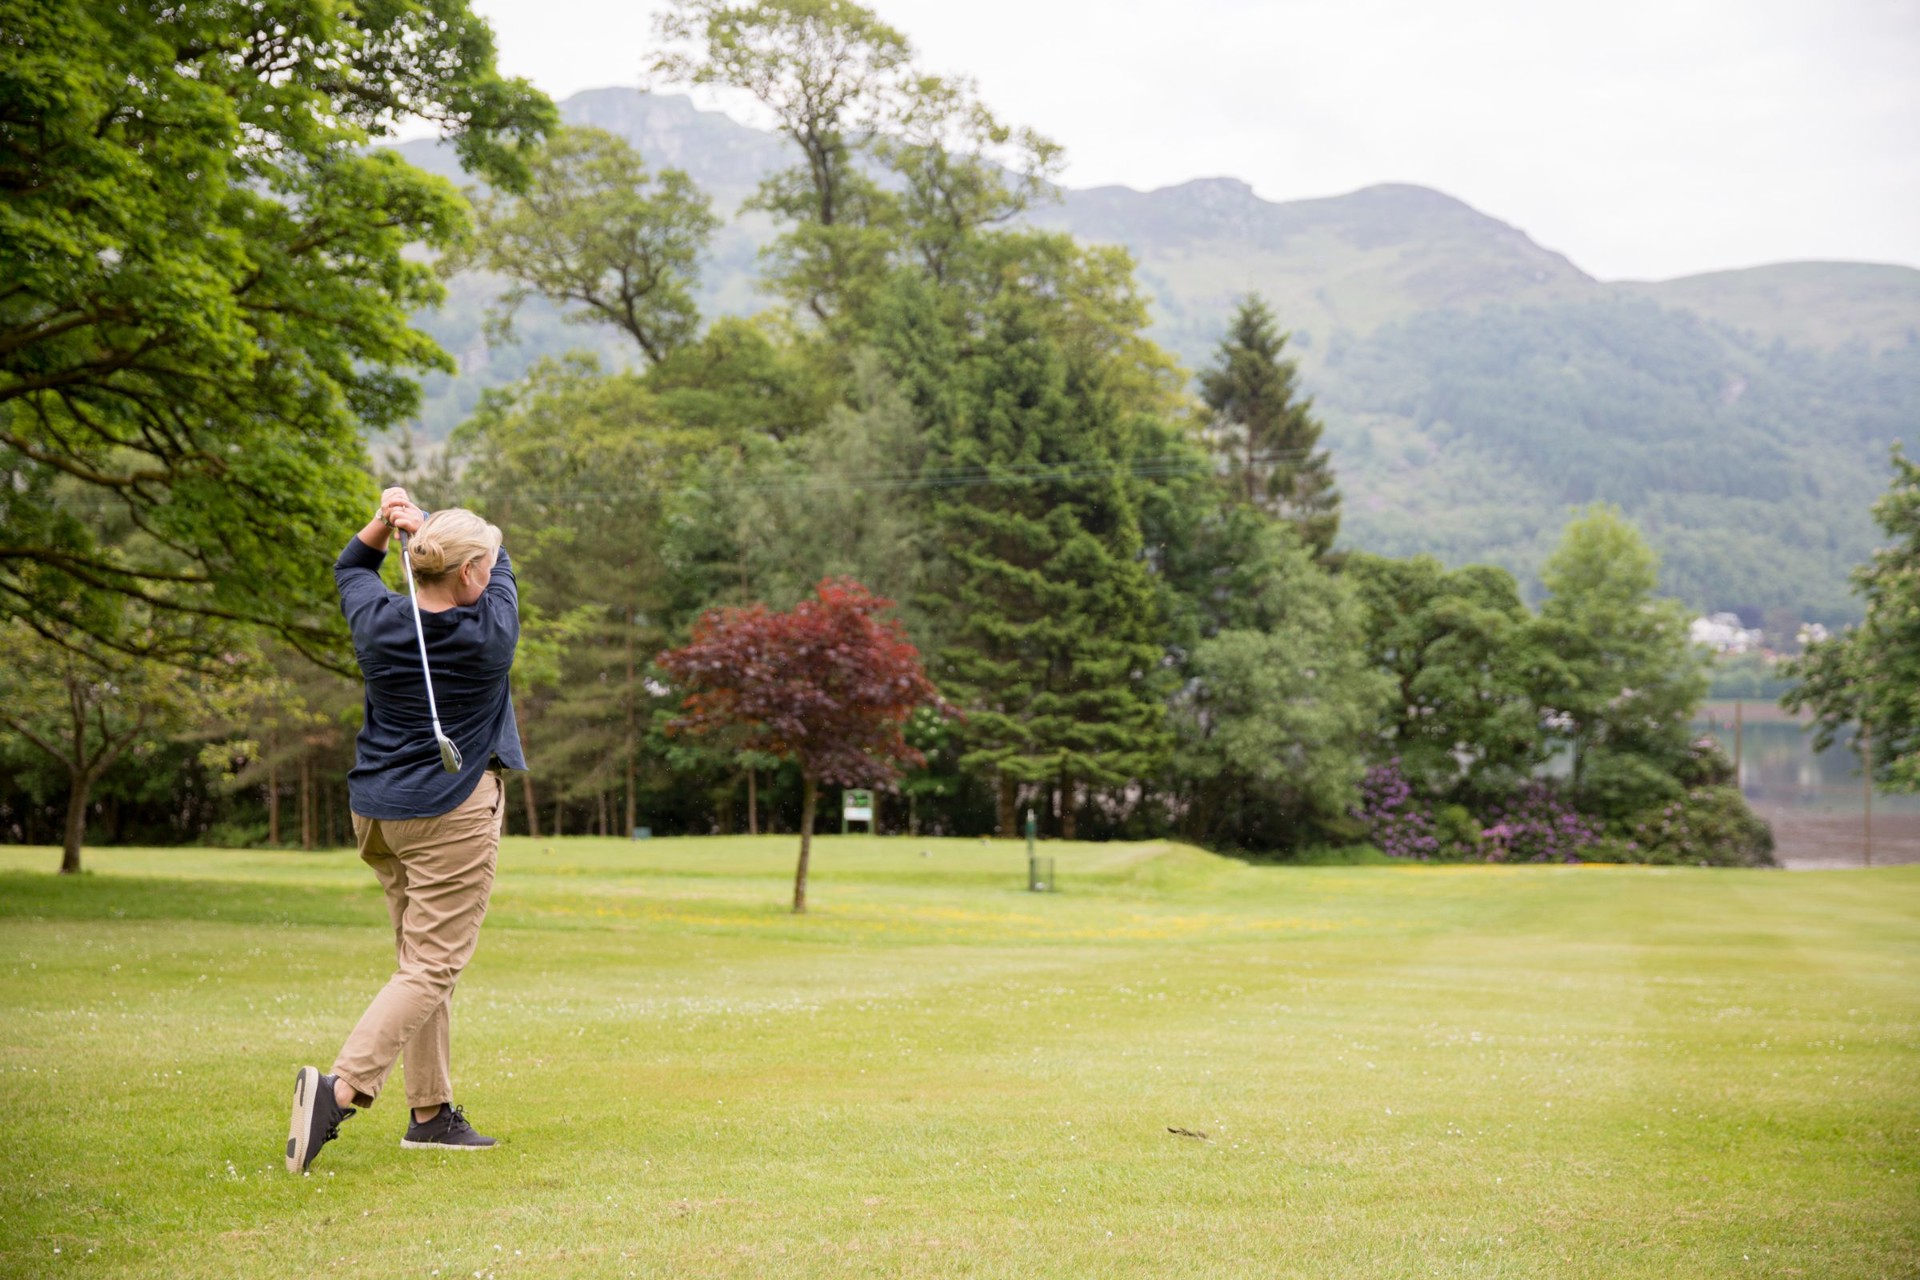 Background image - Golf In Cowal